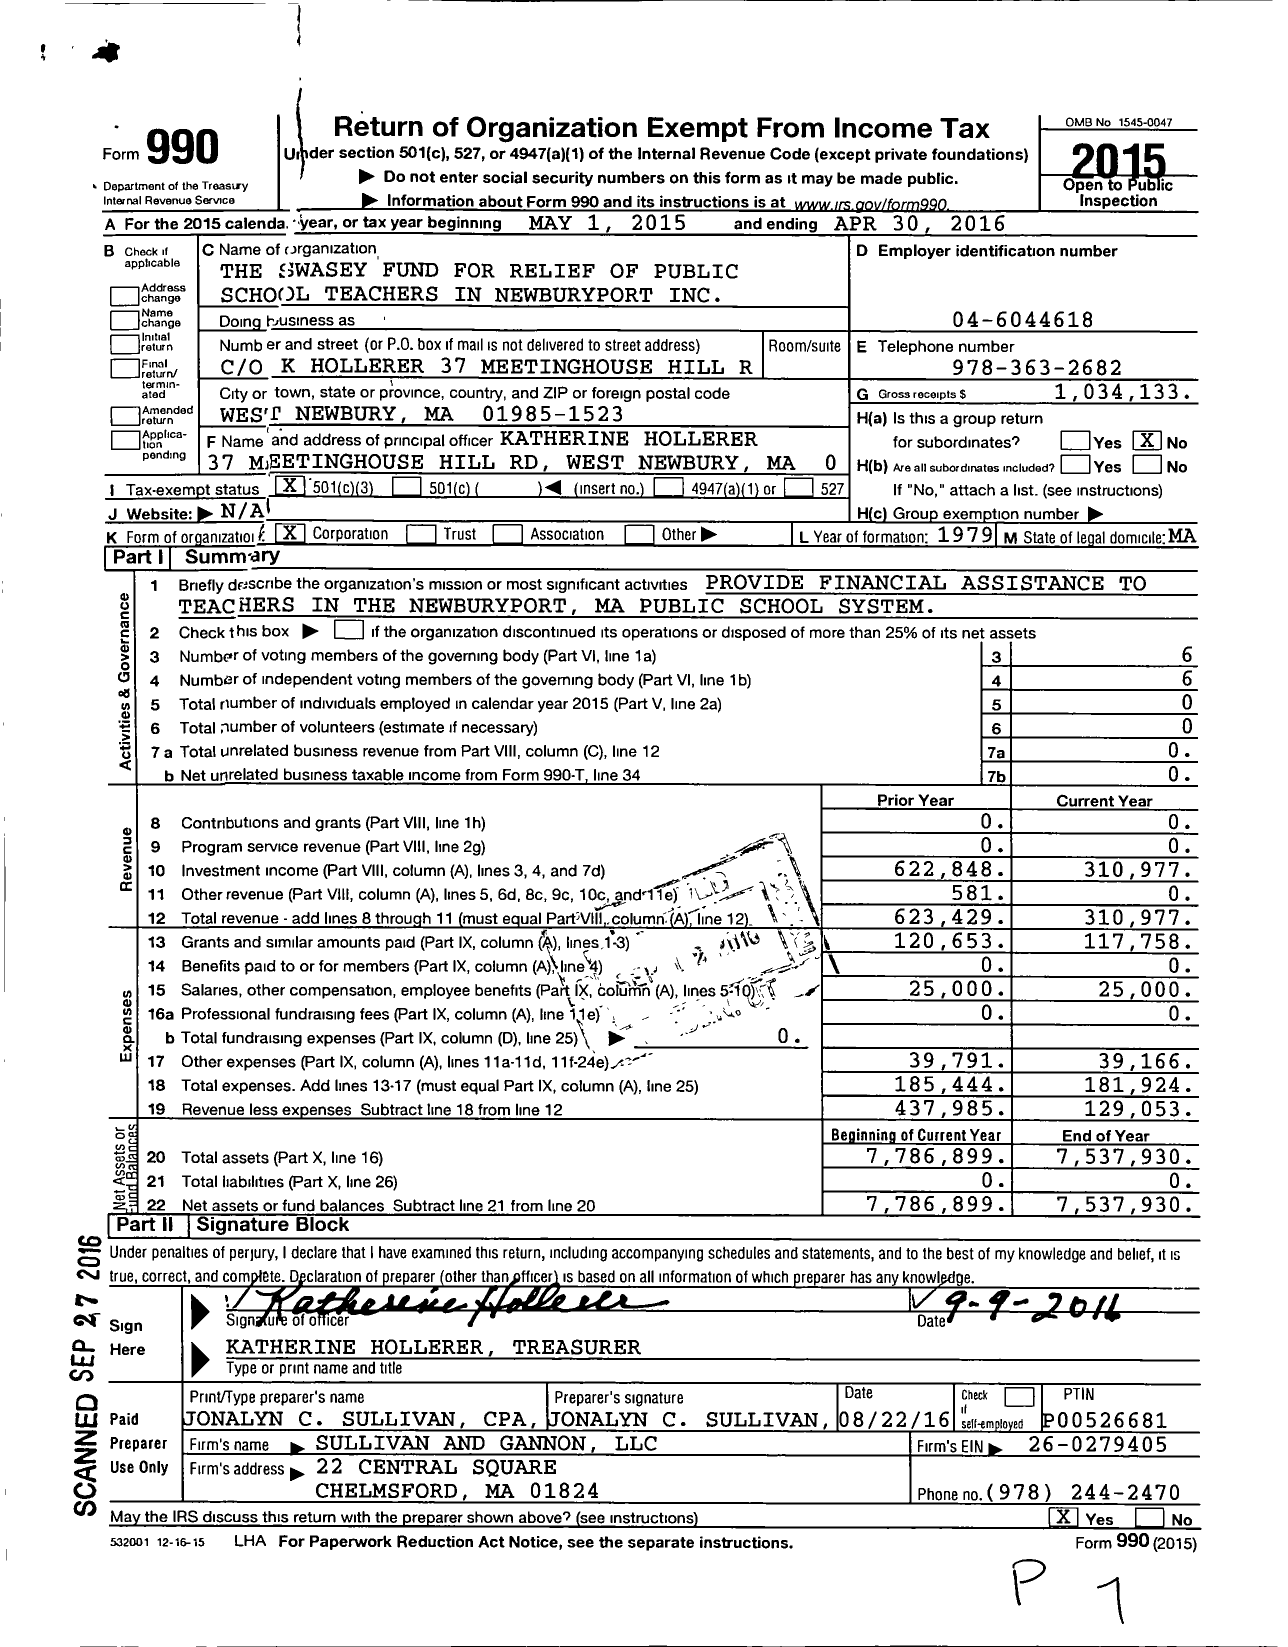 Image of first page of 2015 Form 990 for The Swasey Fund for Relief of Public School Teachers of Newburyport